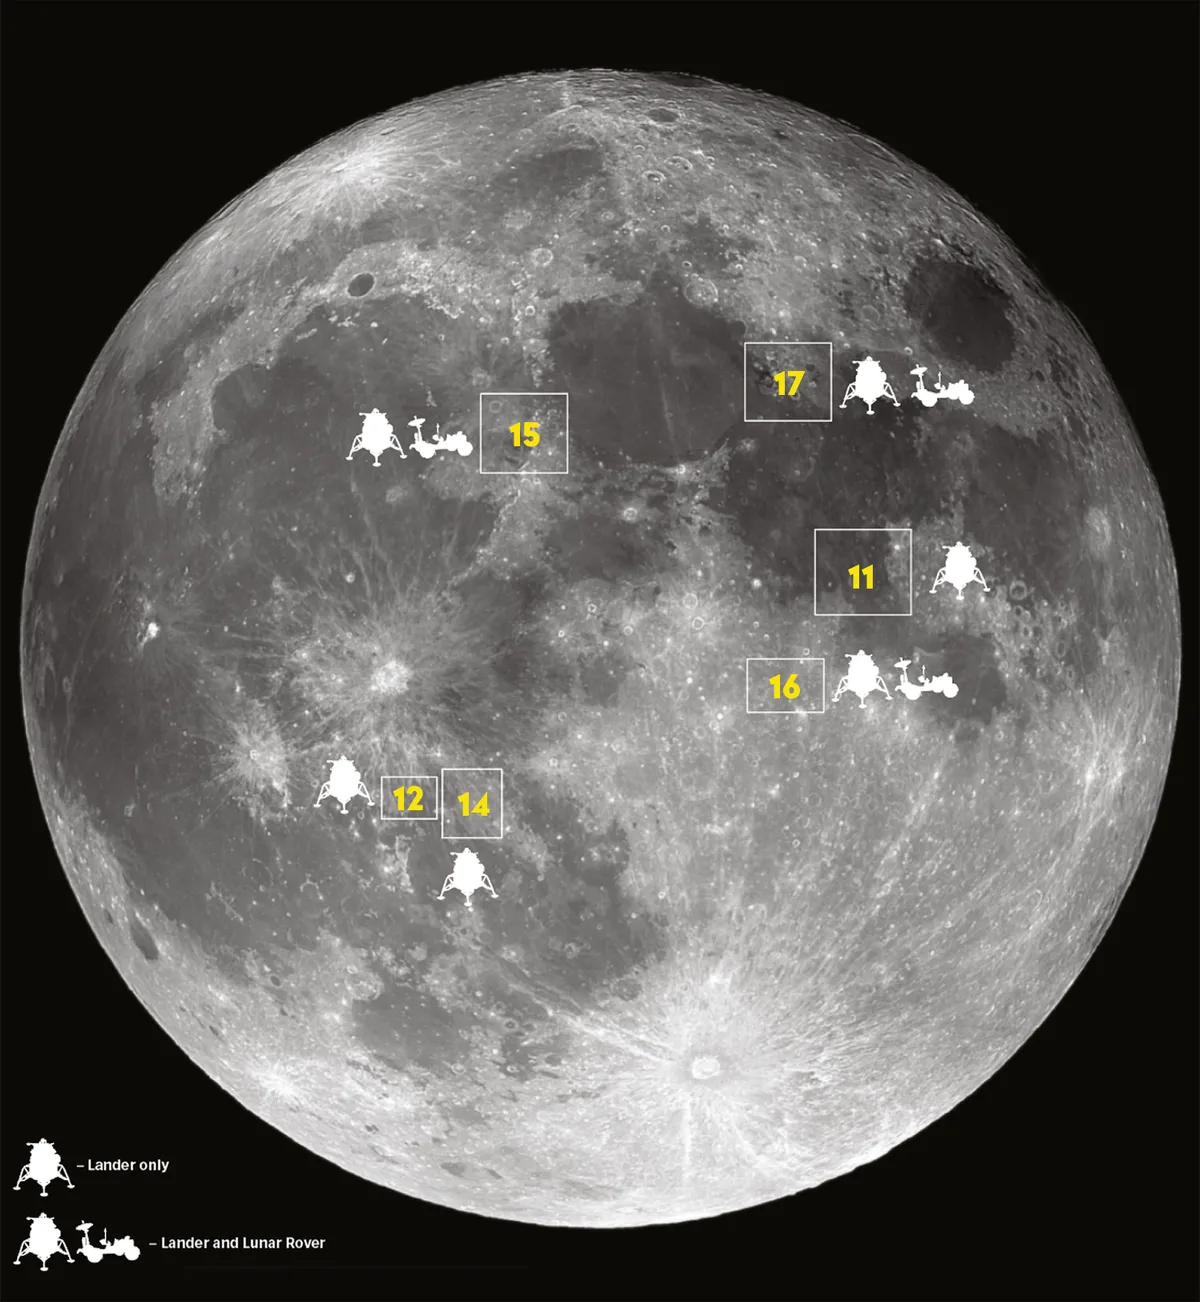 Map showing the Apollo landing sites on the Moon